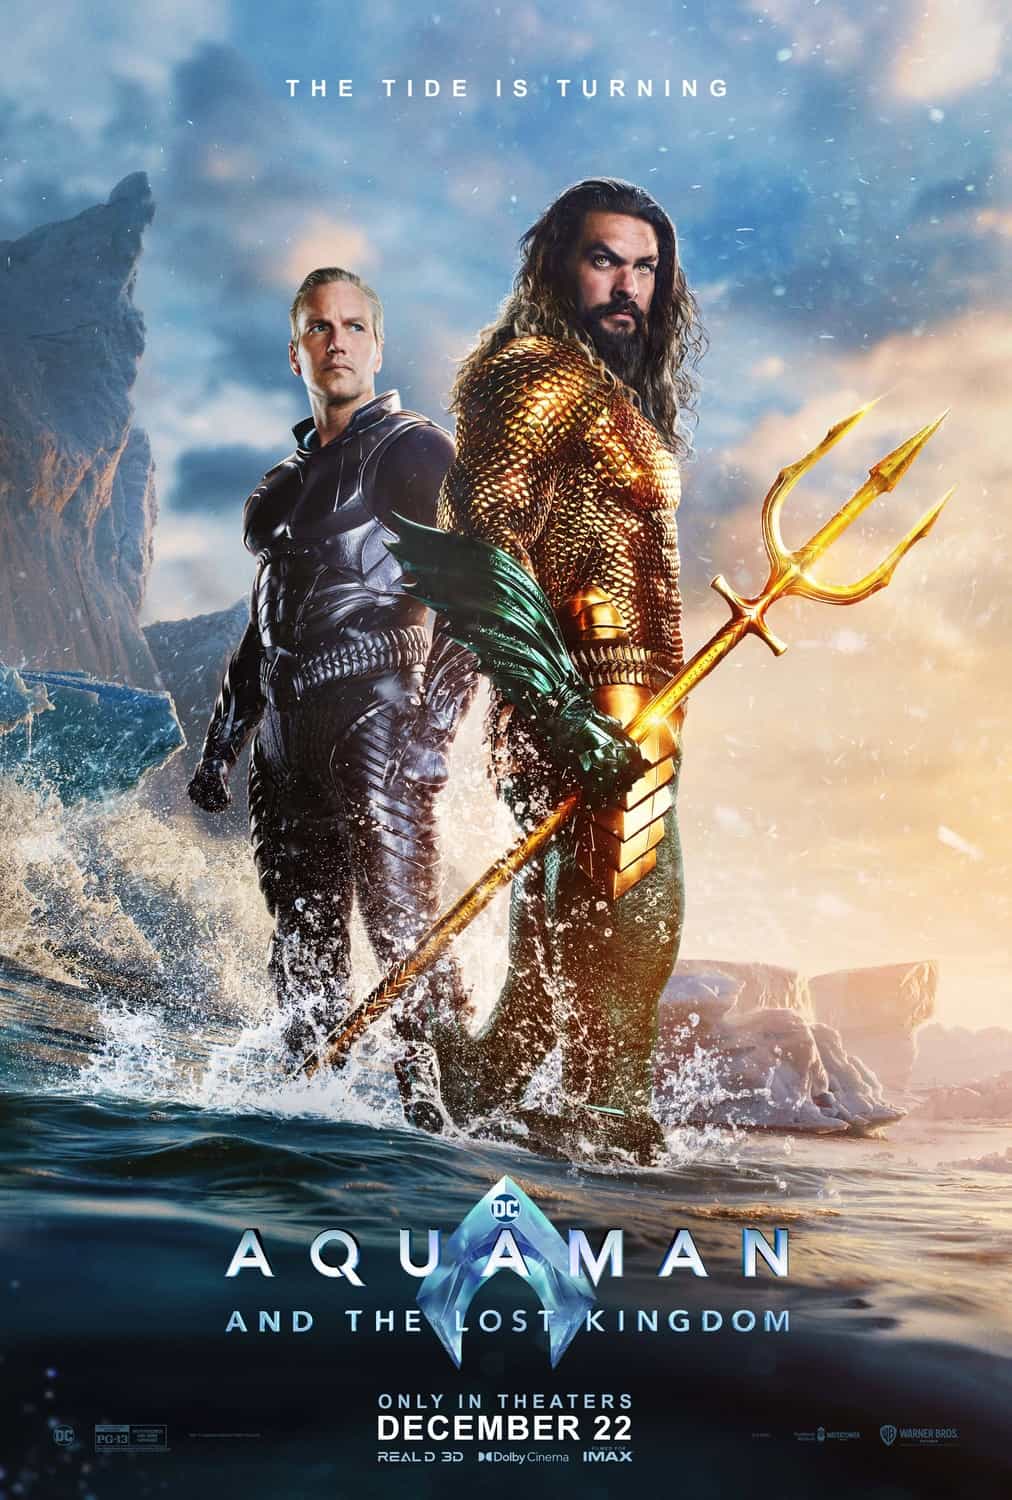 Aquaman And The Lost Kingdom is given a 12A age rating in the UK for moderate violence, threat, injury detail, implied strong language